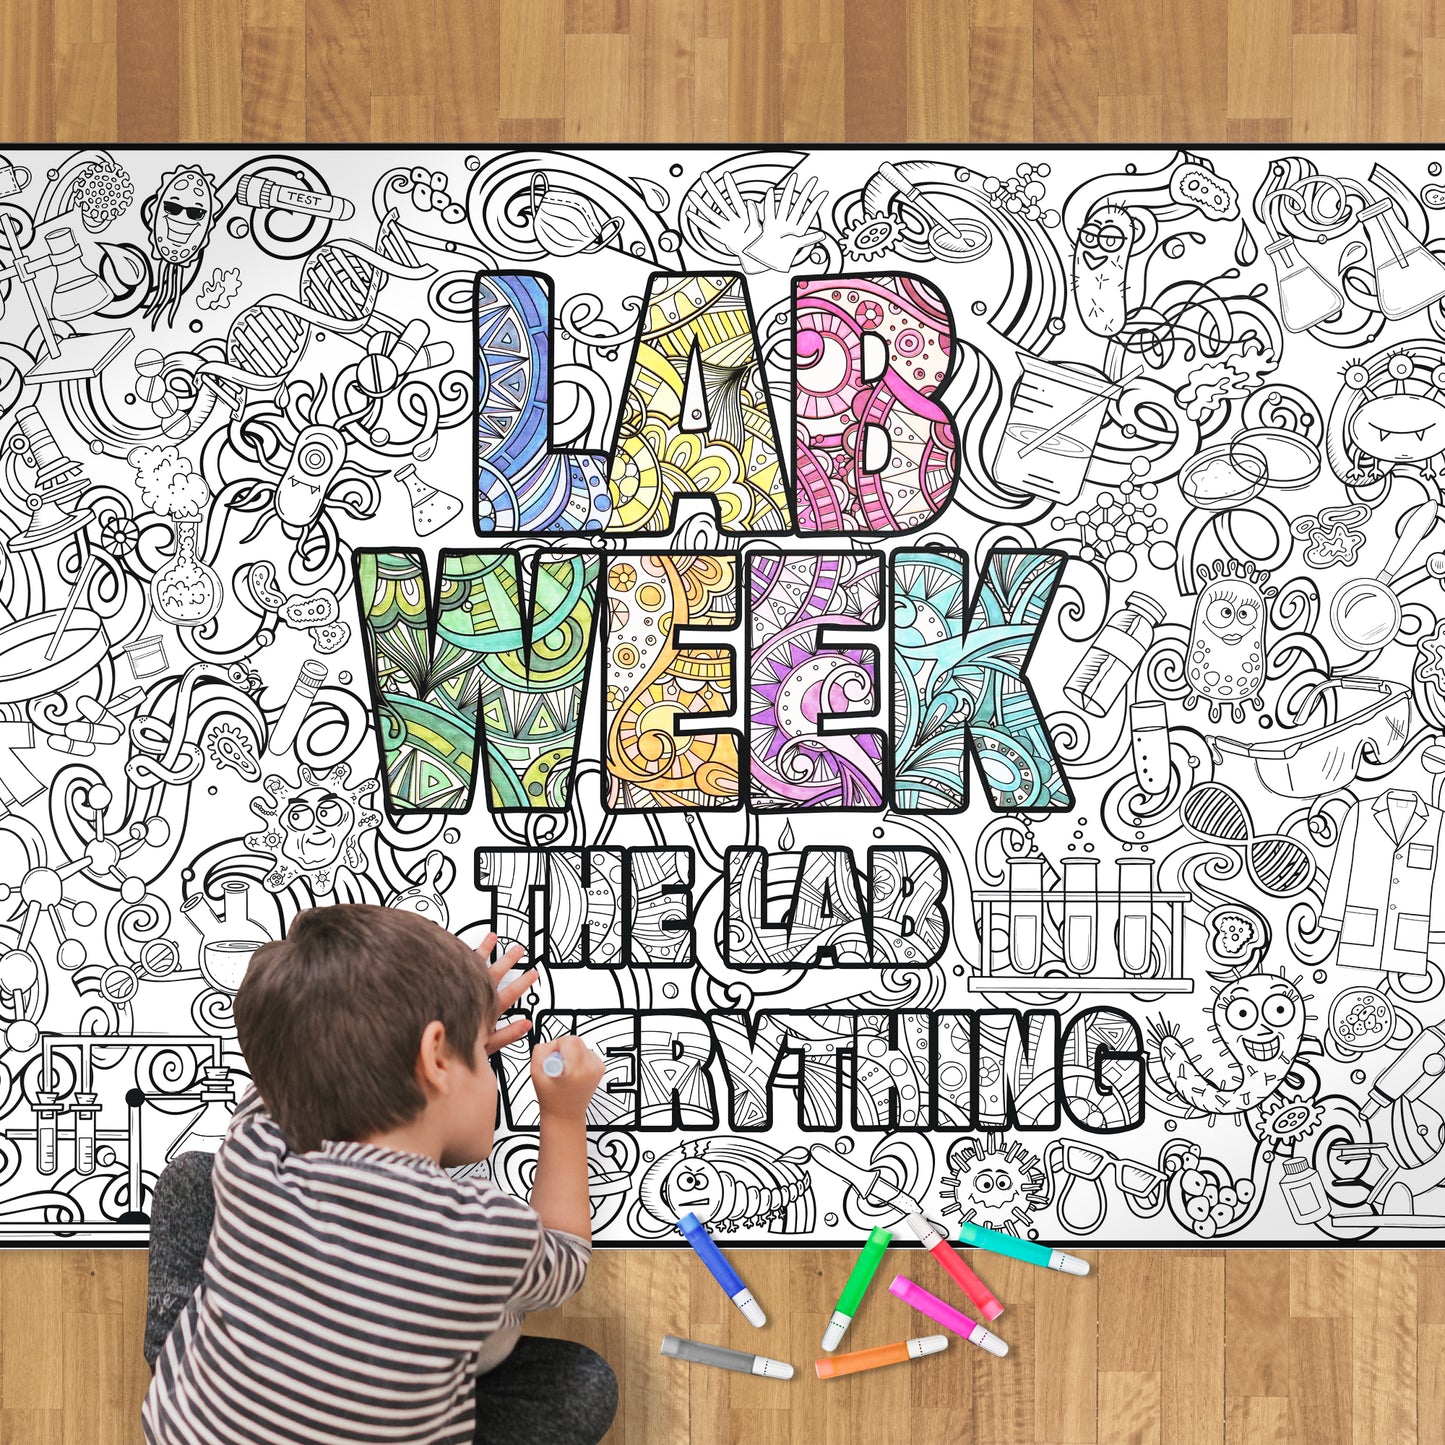 Lab Week Coloring Poster - Learning Science